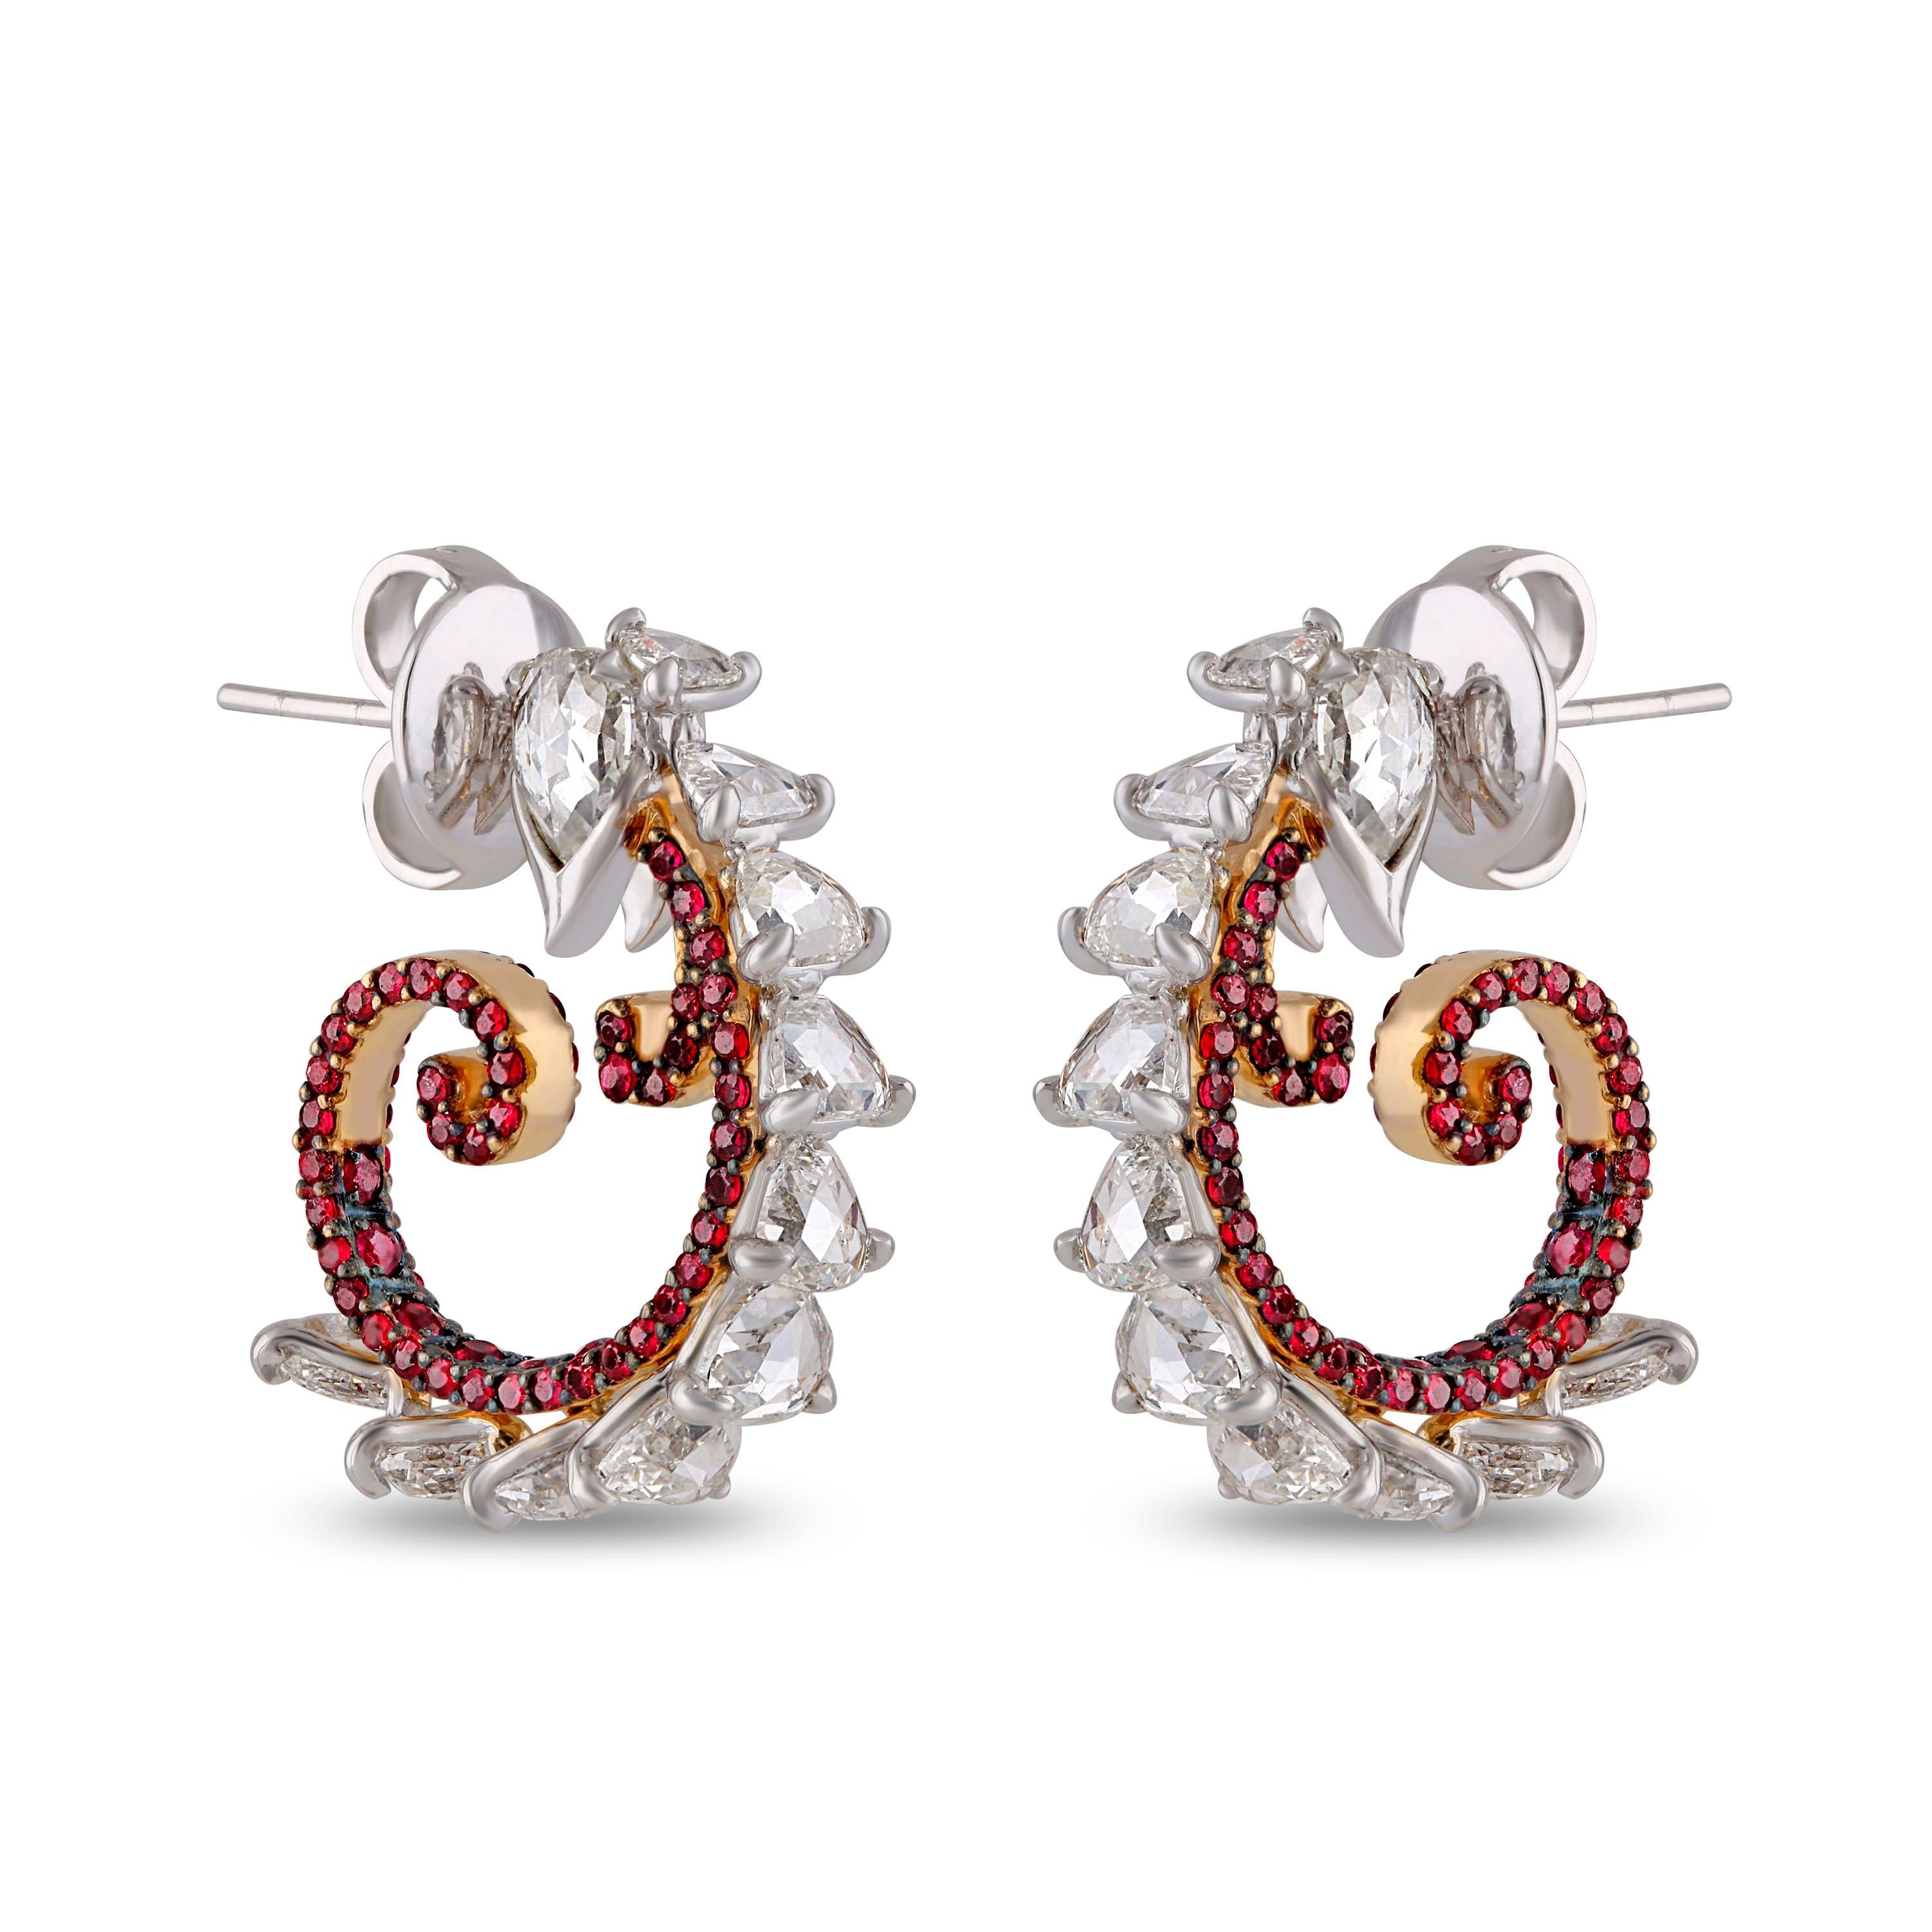 Studio Rêves Diamond and Ruby Studded Curled Hoop Earrings in 18 Karat Gold In New Condition For Sale In Mumbai, Maharashtra